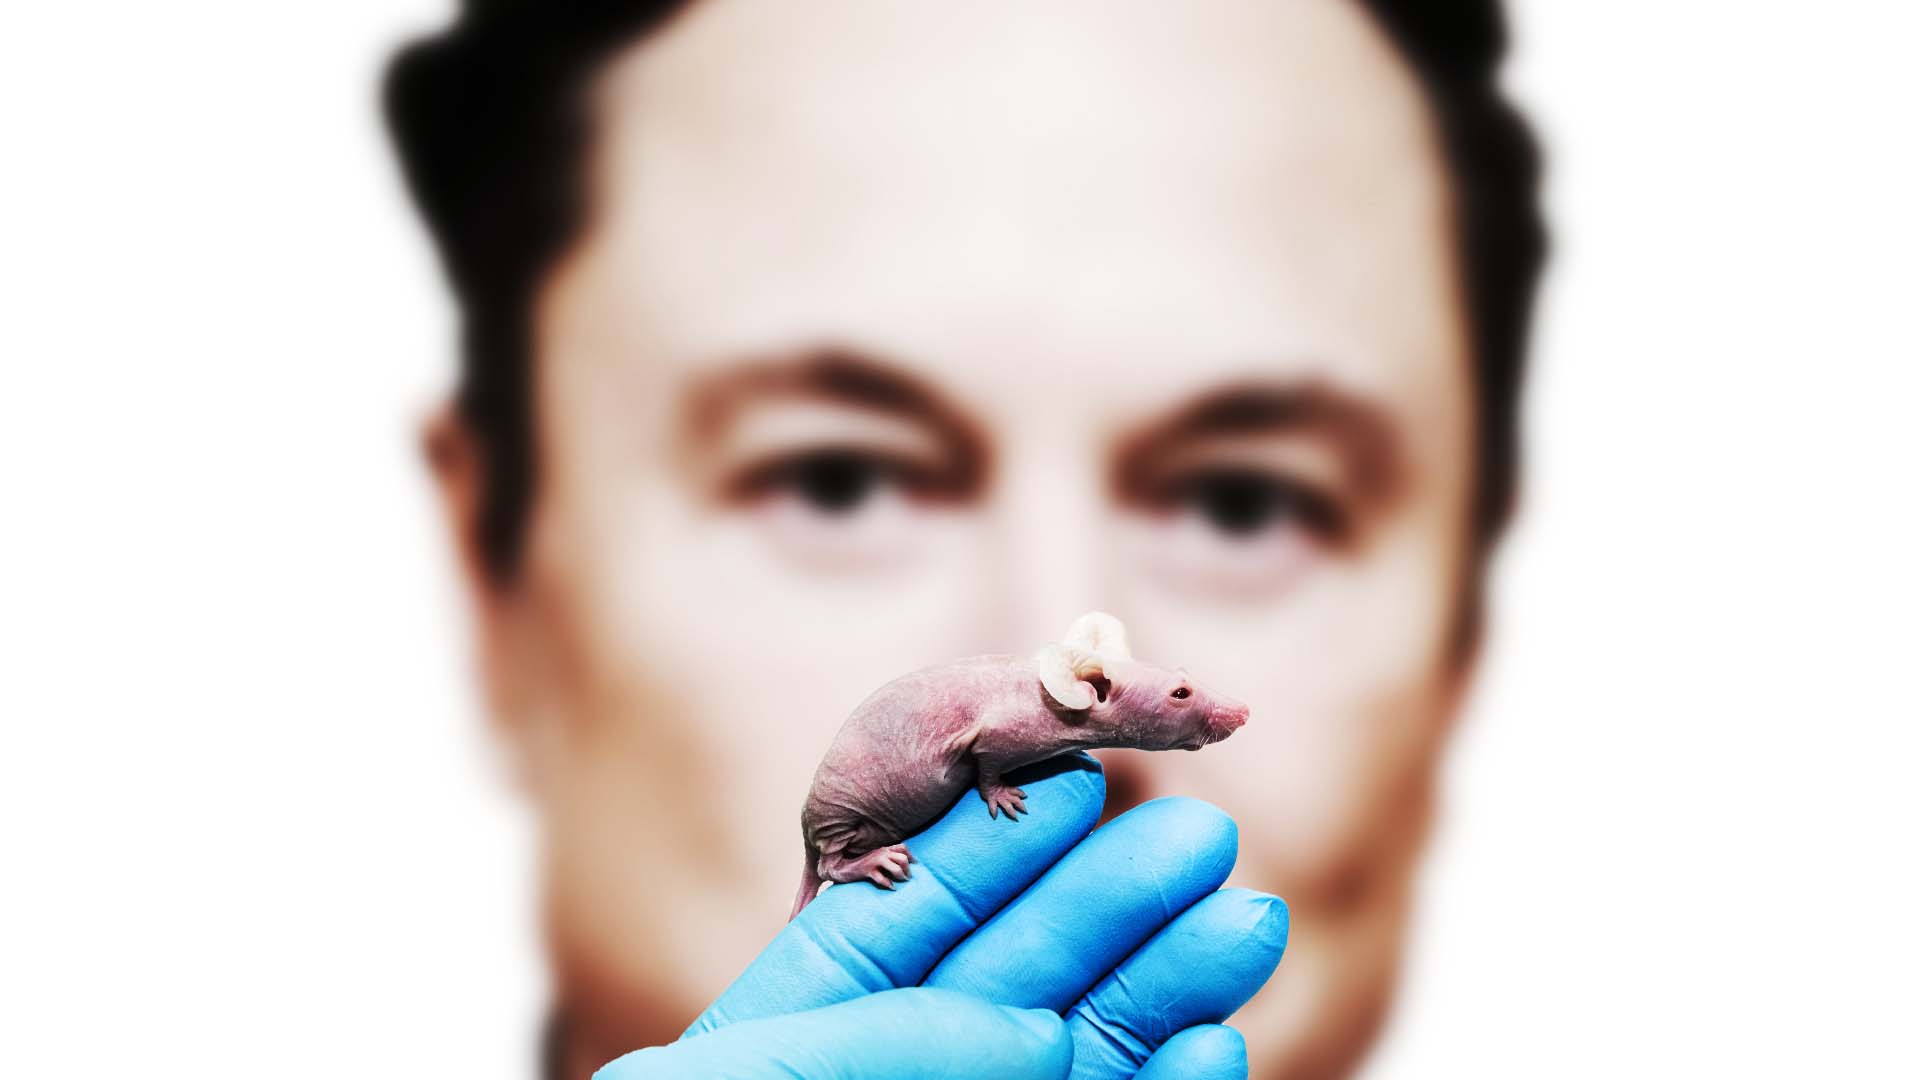 Photo collage of a gloved hand holding a mouse, with Elon Musk’s face in the background.